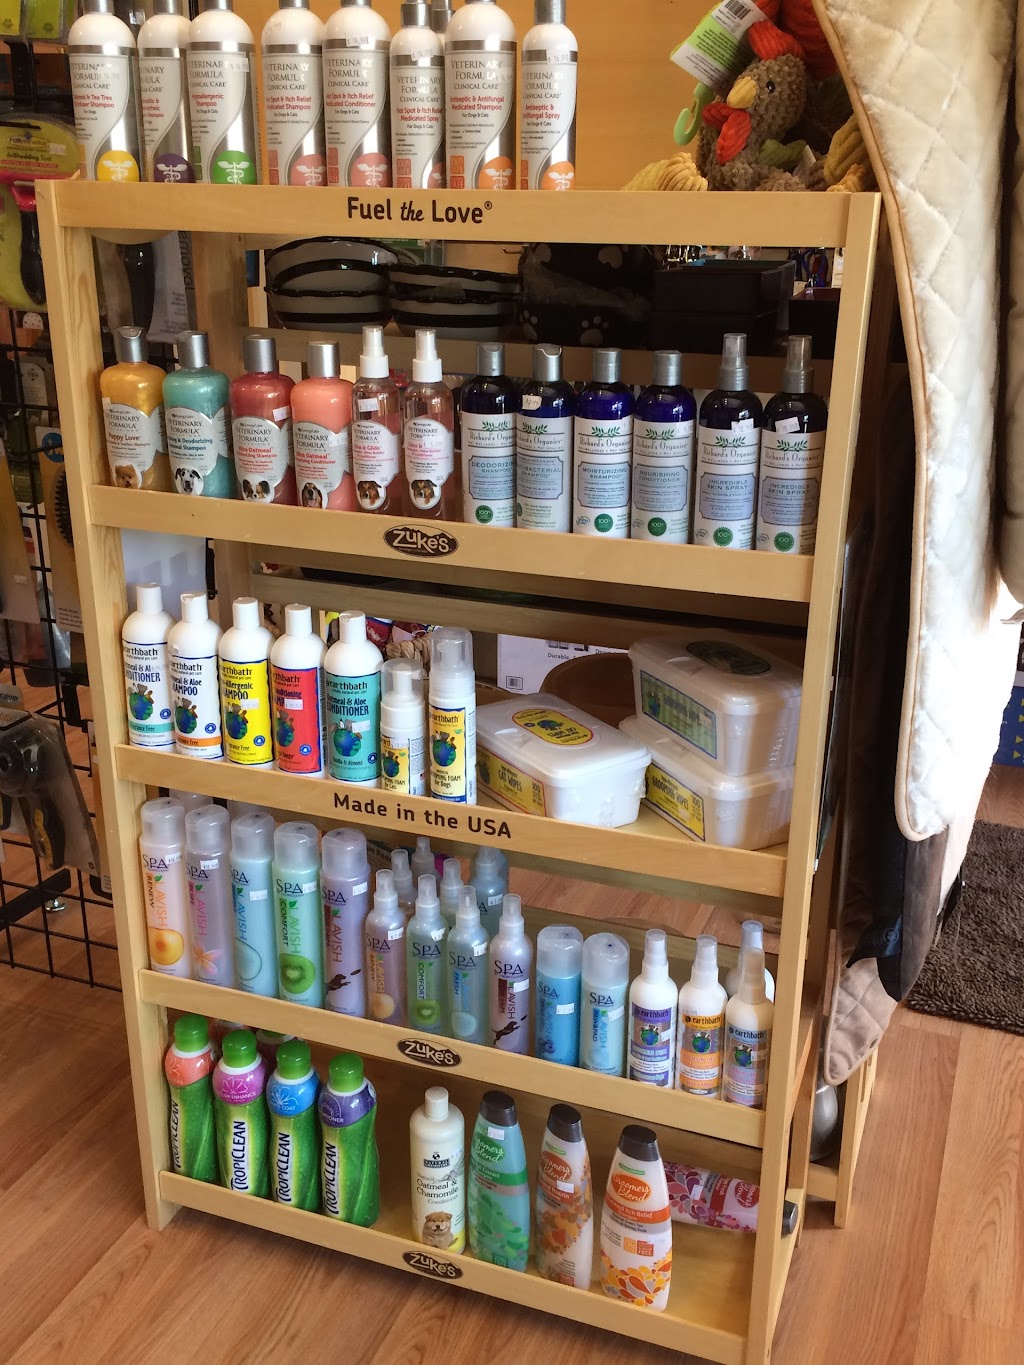 Paws & Tail Pantry | 386 Main St, Rosendale, NY 12472 | Phone: (845) 658-7297